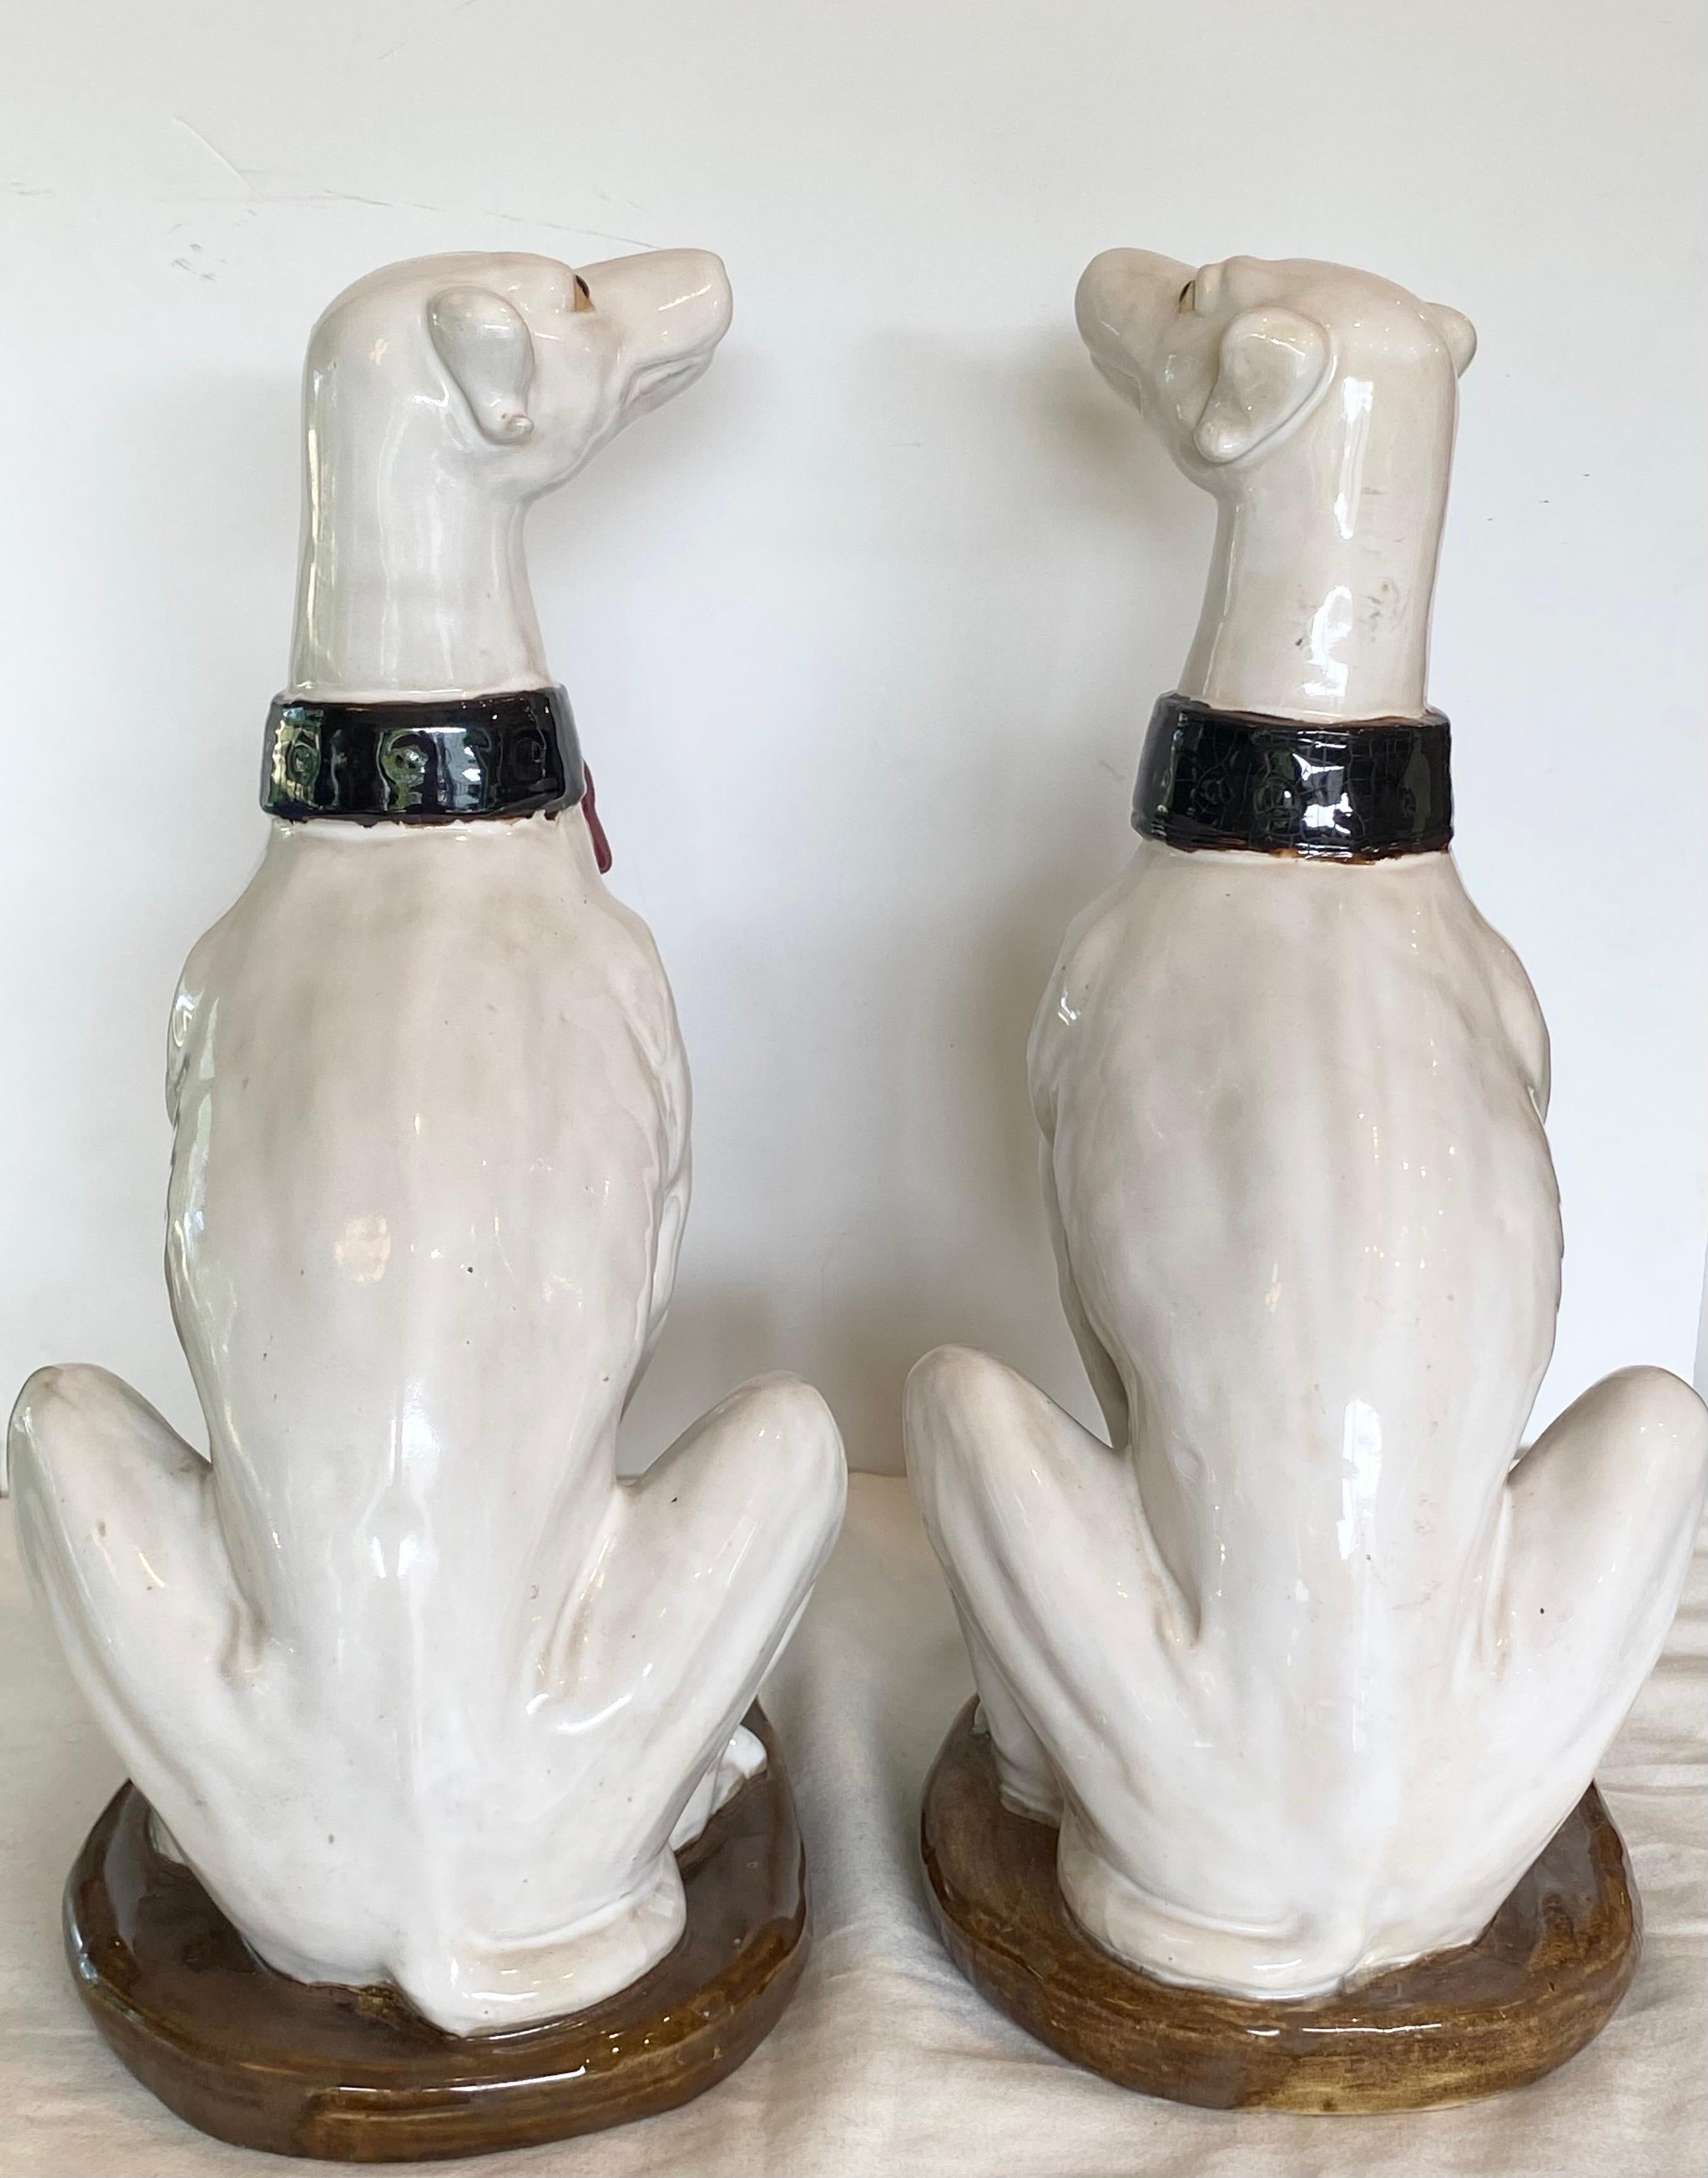 Ceramic Whimsical Pair of Whippets